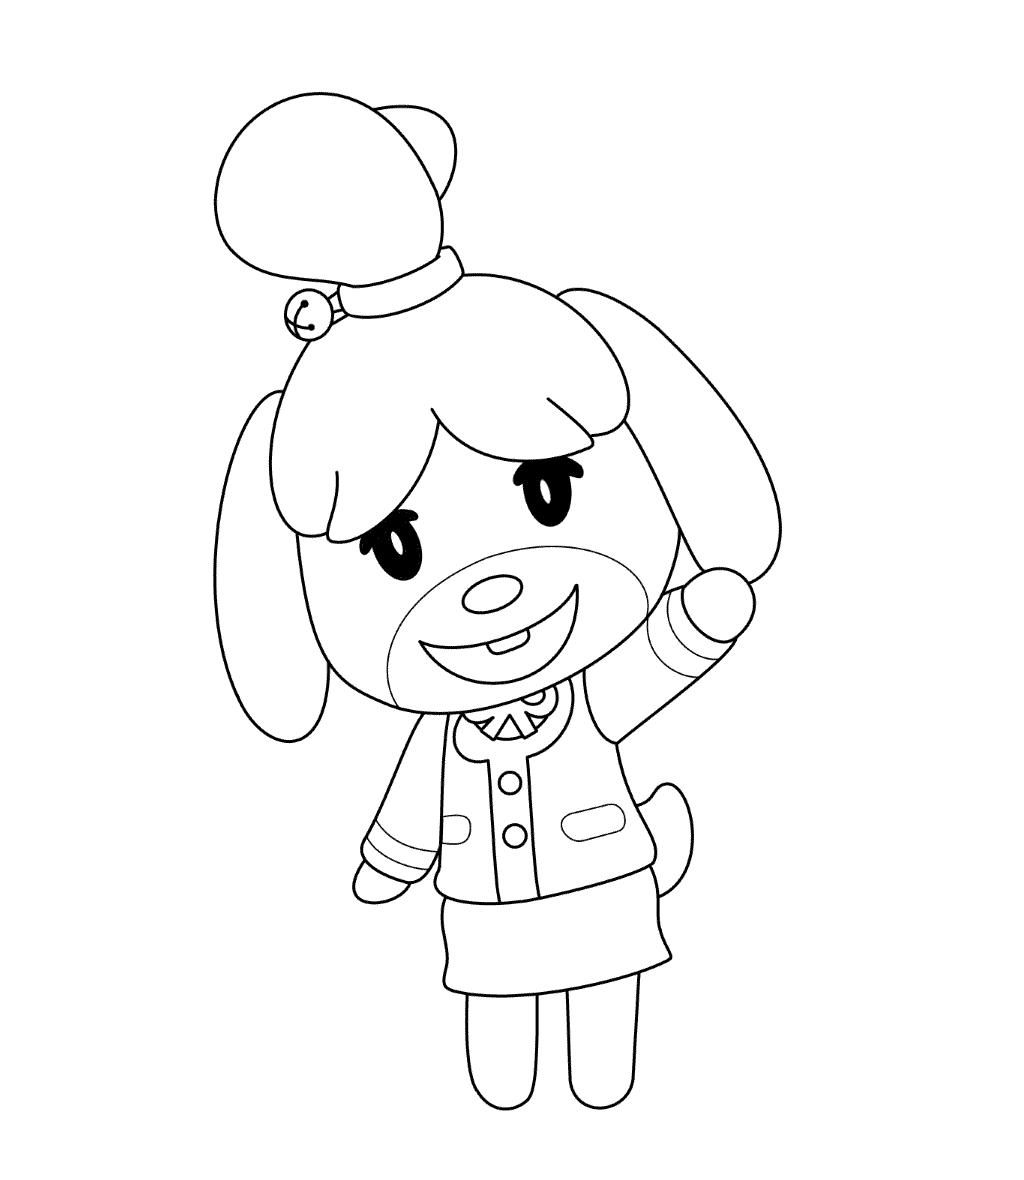 Isabelle Animal Crossing Shih Tzu Coloring Page